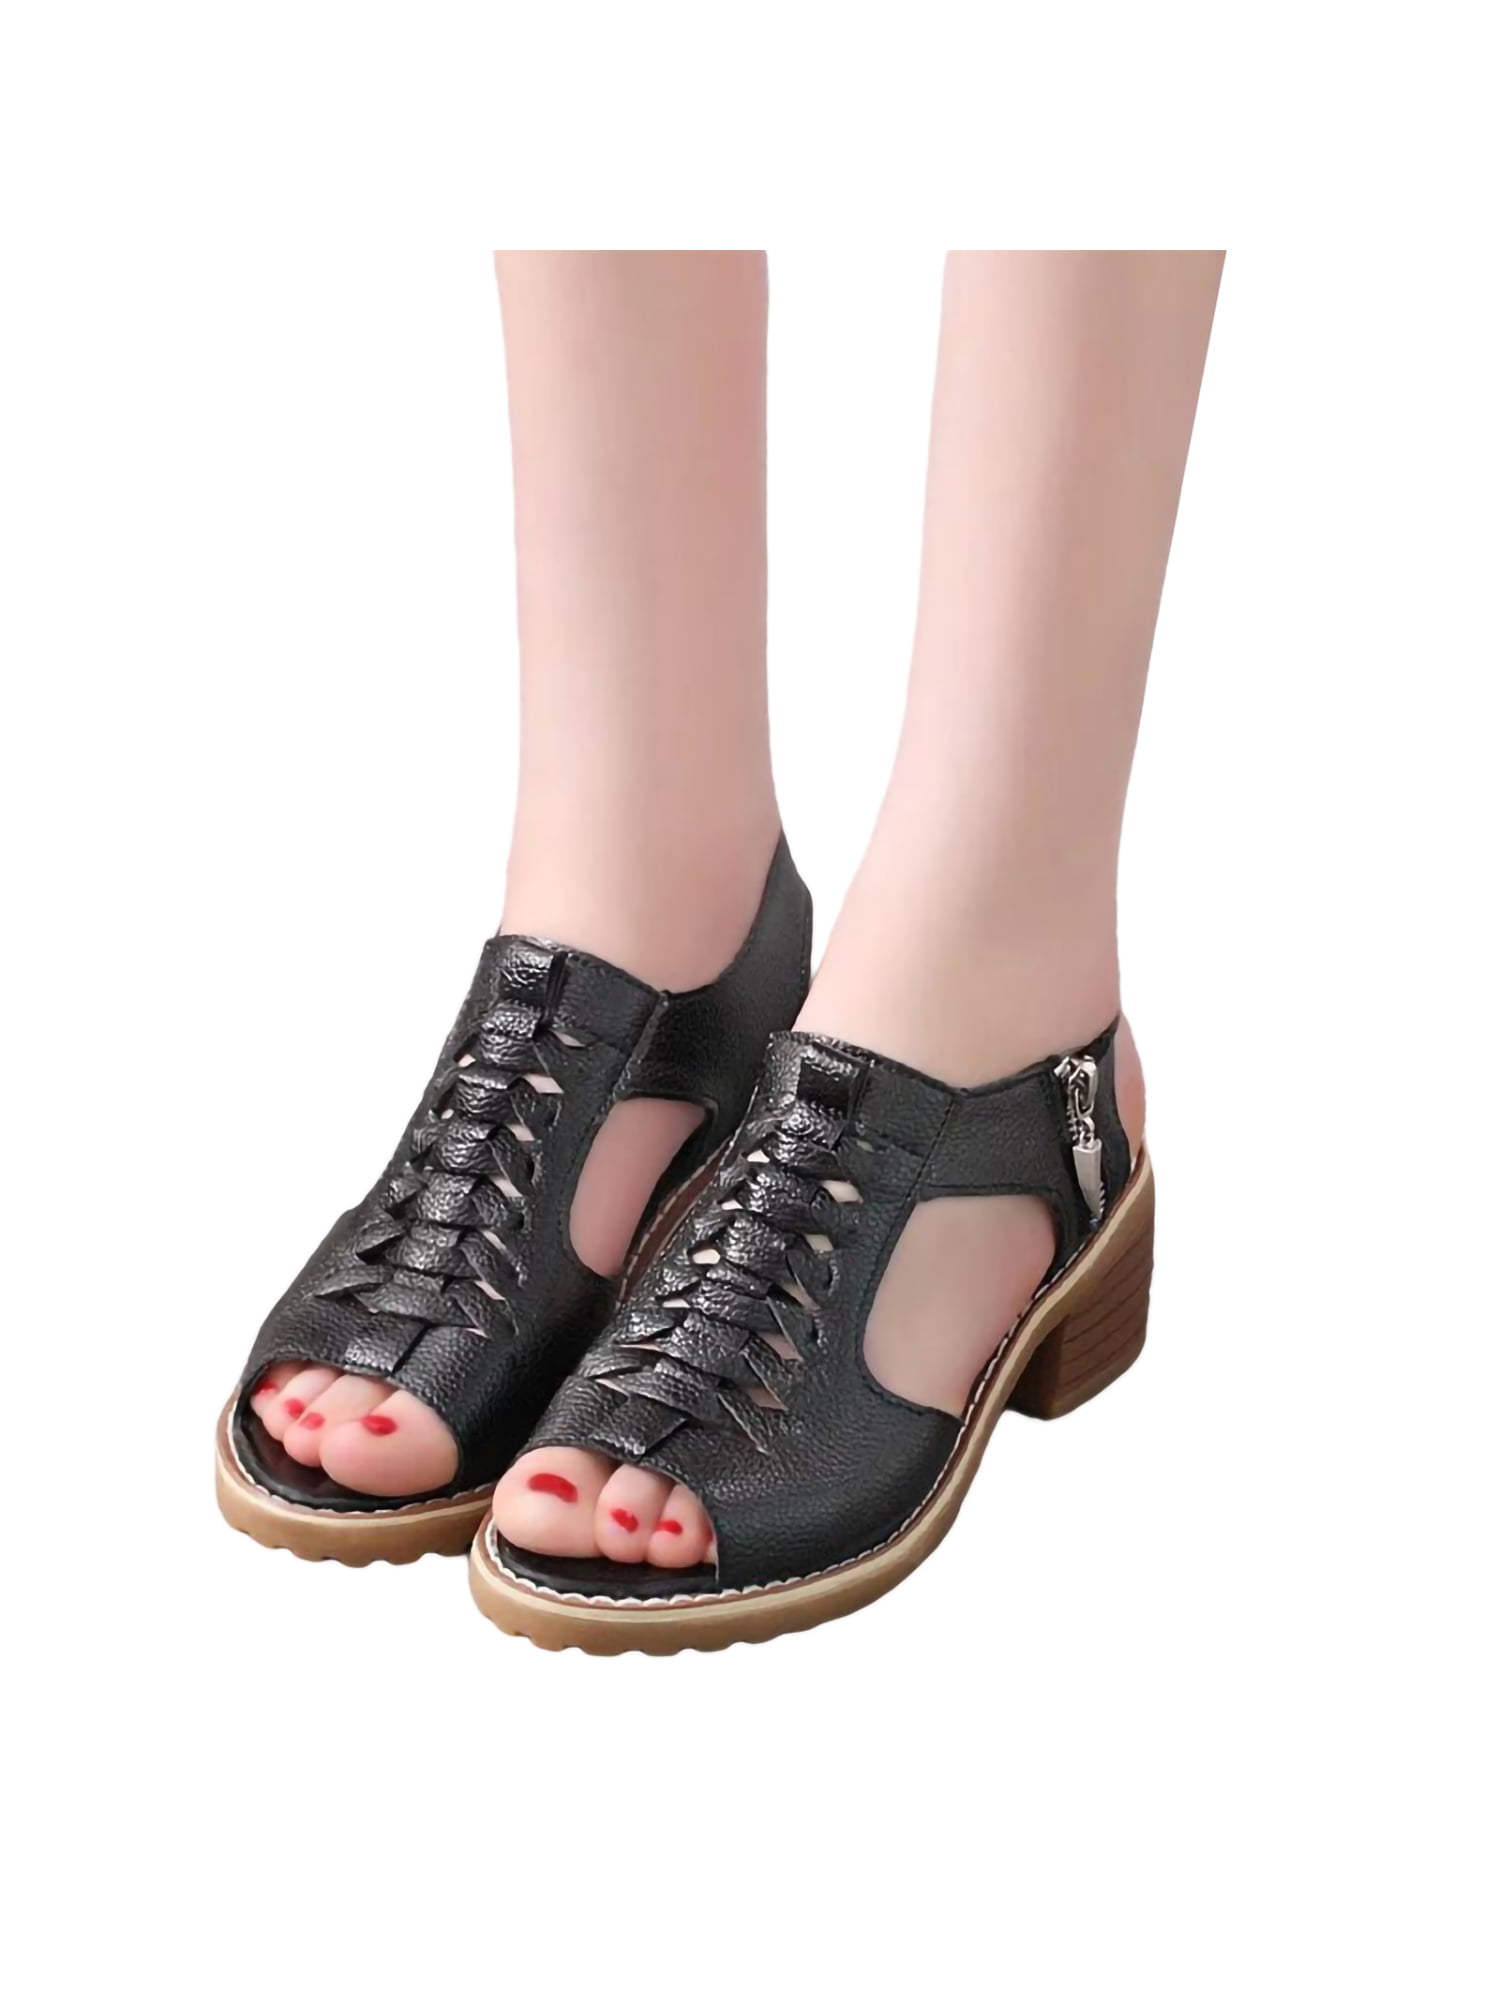 Stylish and Comfortable Women's Wedge Sandals Perfect for Casual and ...